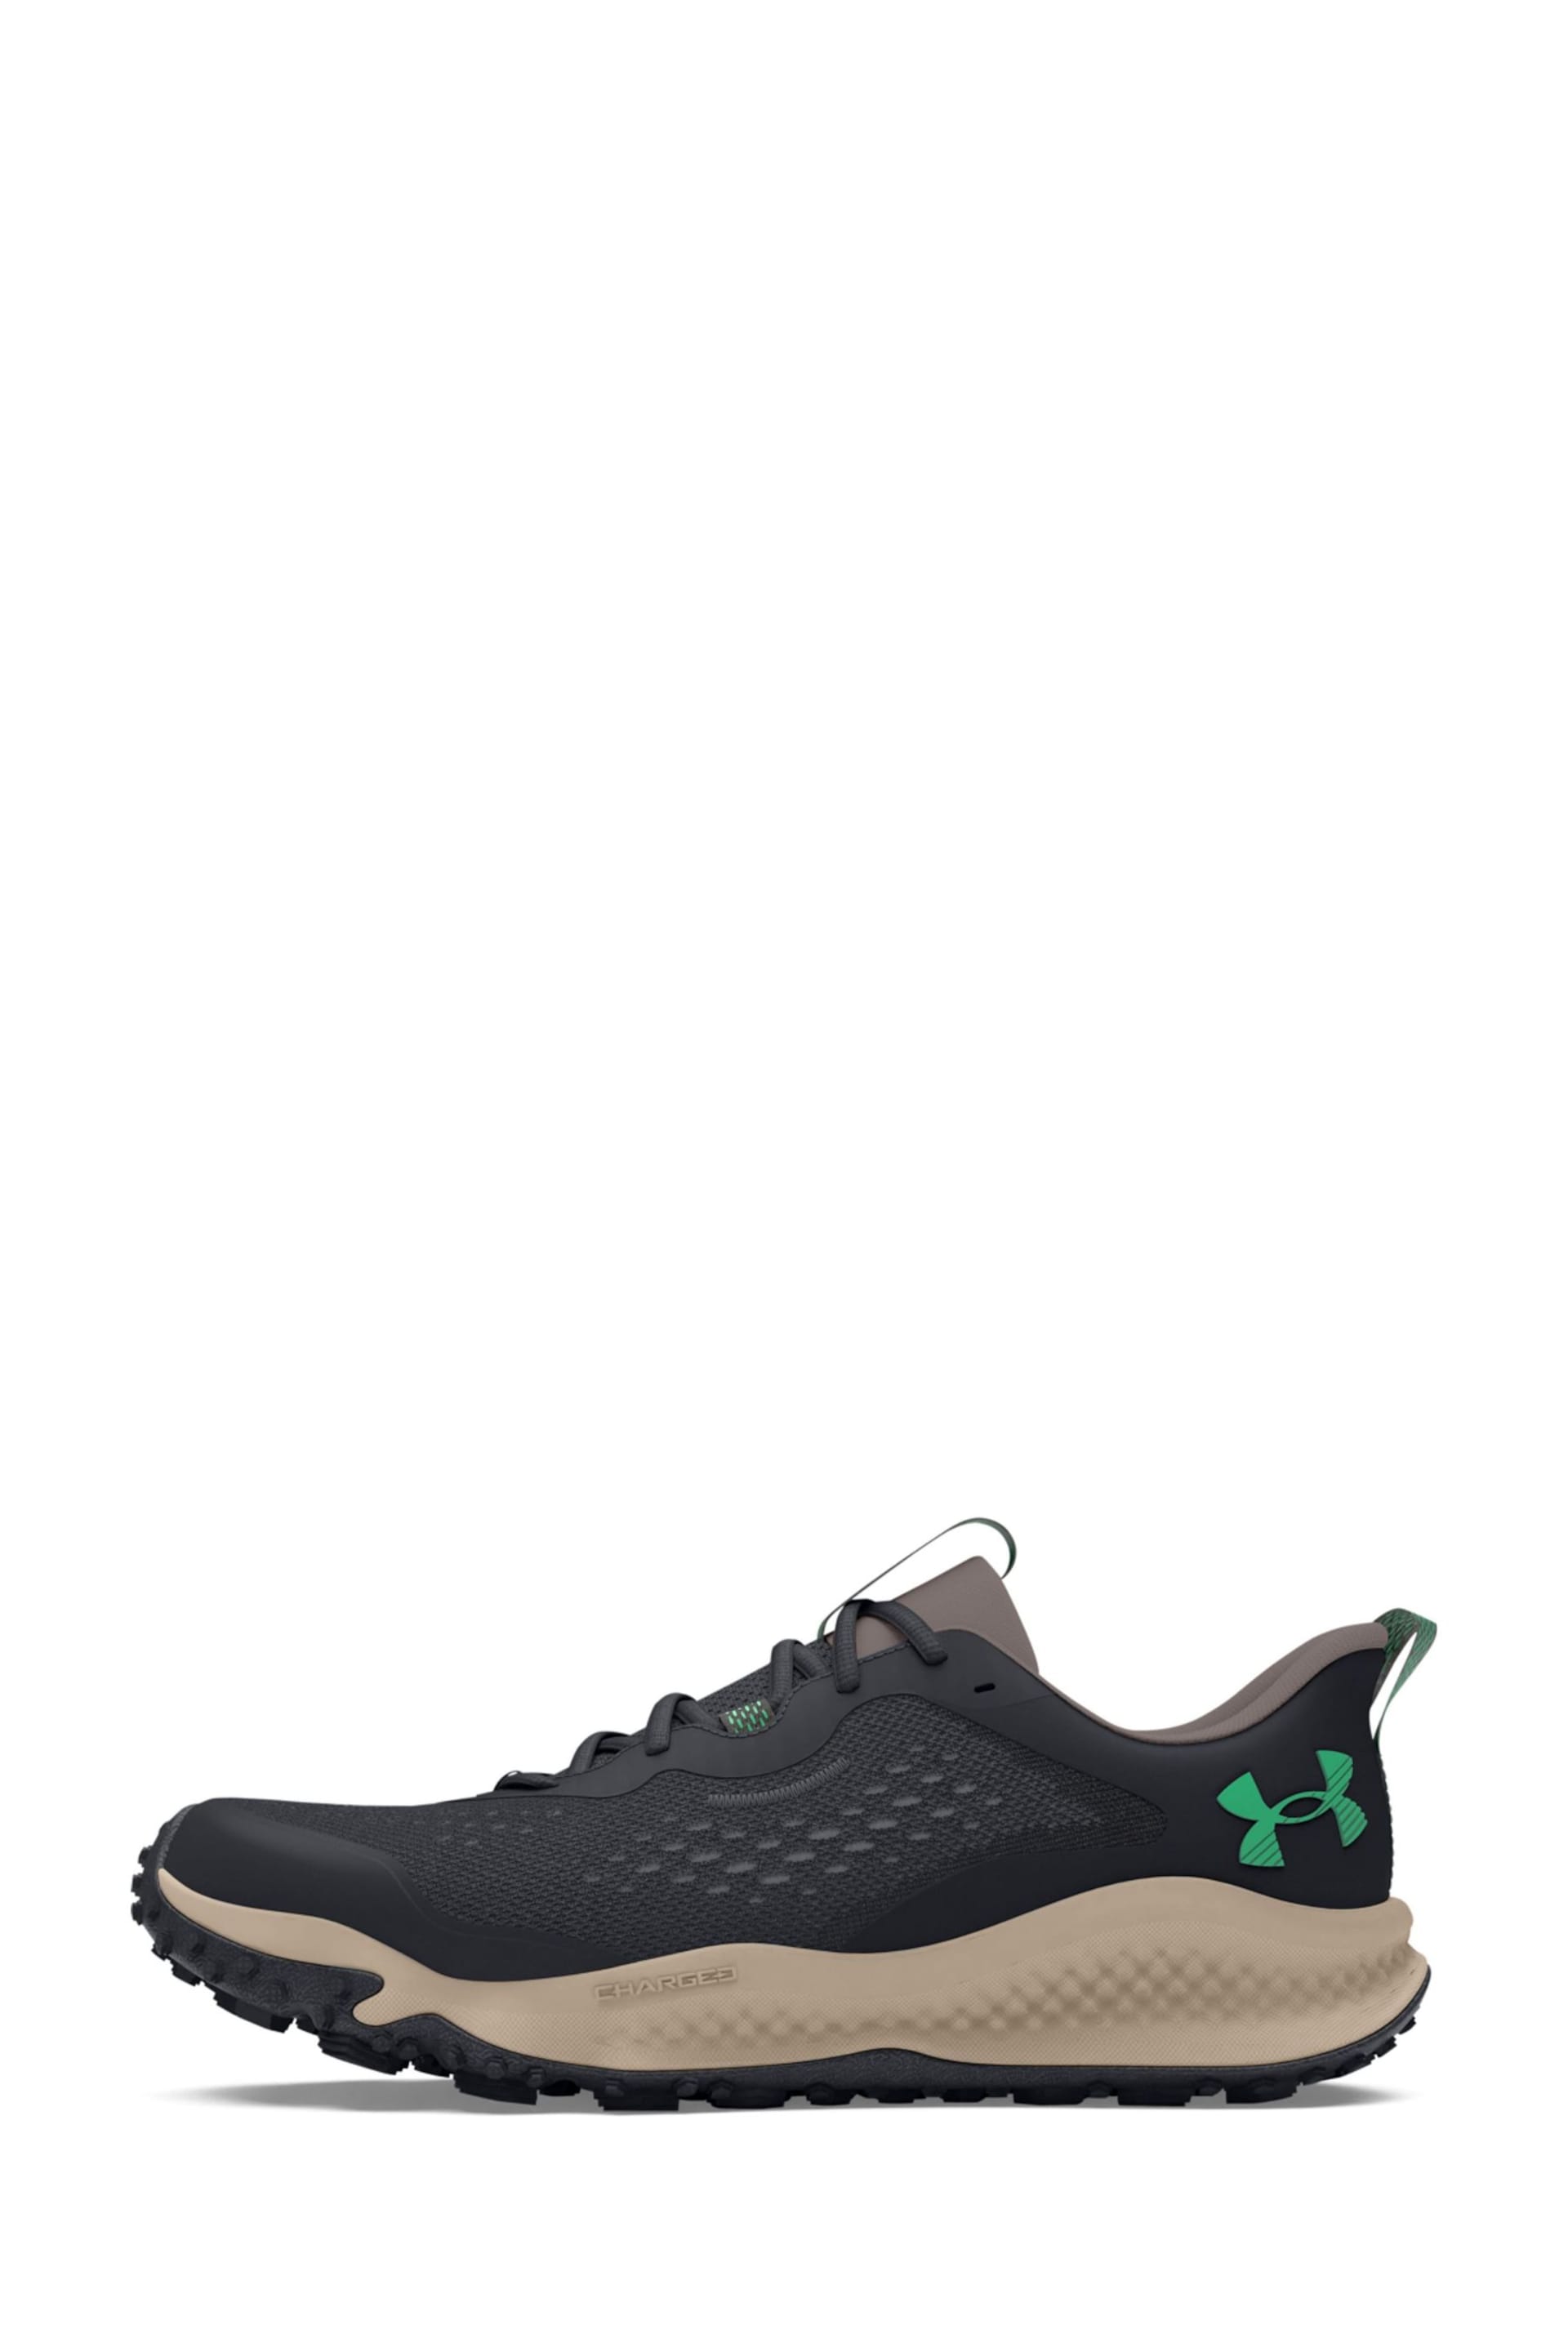 Under Armour Charged Maven Trail Black Trainers - Image 2 of 7